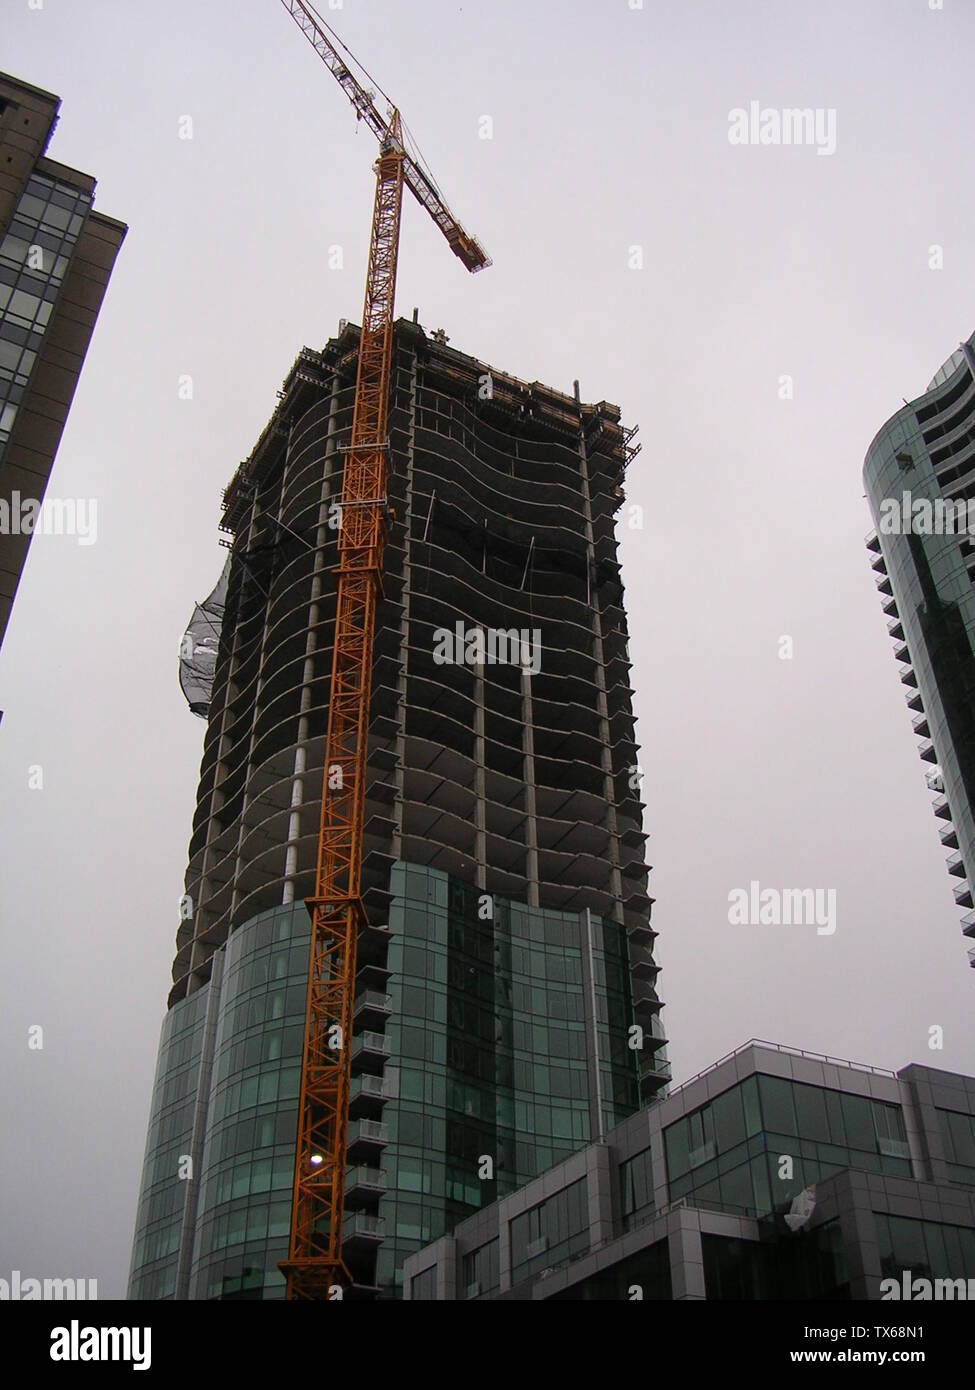 The Infinity (300 Spear Street) complex seen on a stormy day. The crane and tower I are on the left, while the completed tower II is on the right and the Spear Street midrise is on the bottom right.; 23 February 2008; Own work (Original caption:  I created this work entirely by myself); Cheers. Trance addict - Armin van Buuren - Oceanlab; Stock Photo